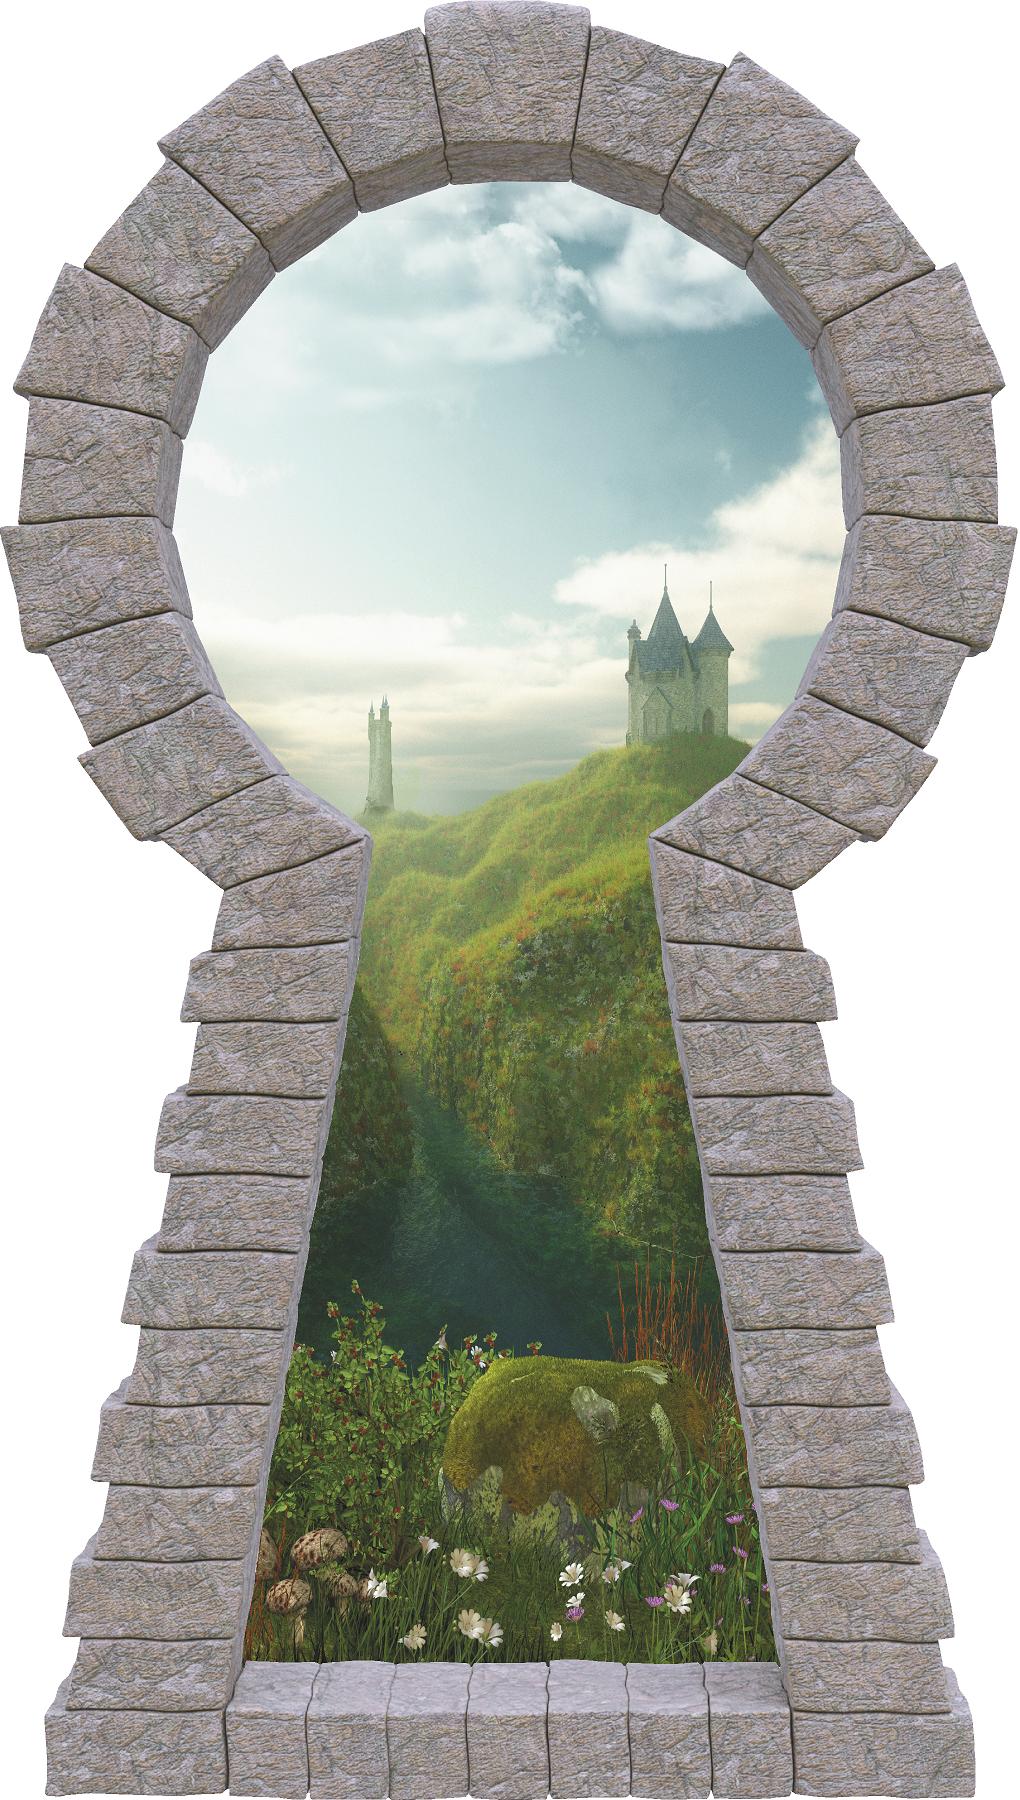 3D Stone Keyhole Wall Decal Castle By the Sea Fairy Tale Princess Brick Window Removable Fabric Vinyl Wall Sticker | DecalBaby